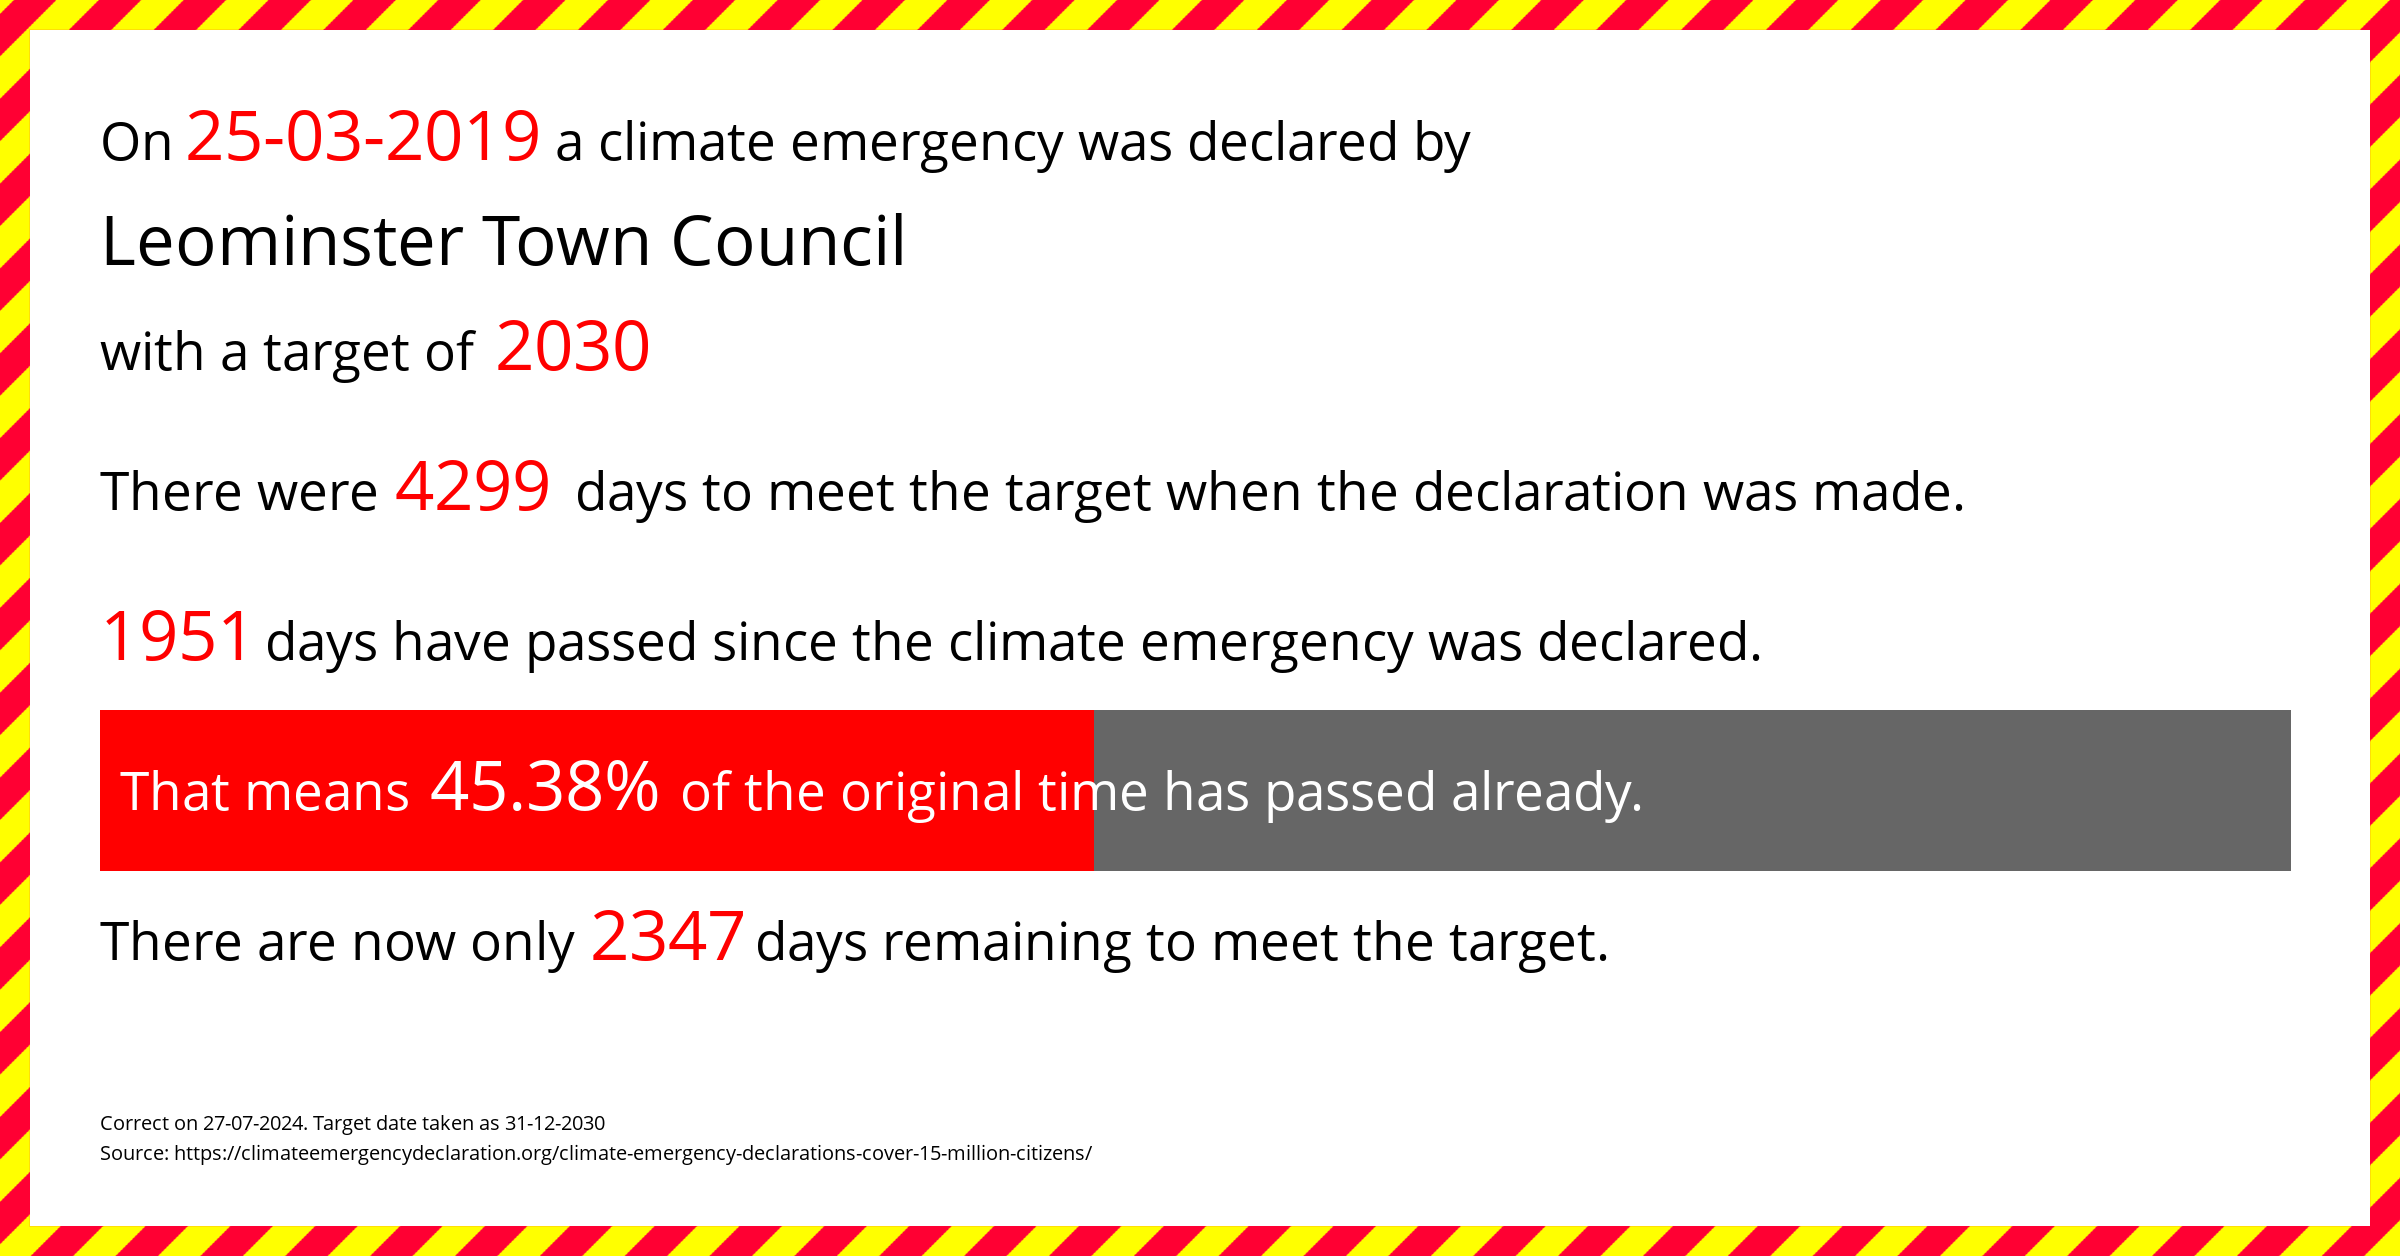 Leominster Town Council declared a Climate emergency on Monday 25th March 2019, with a target of 2030.